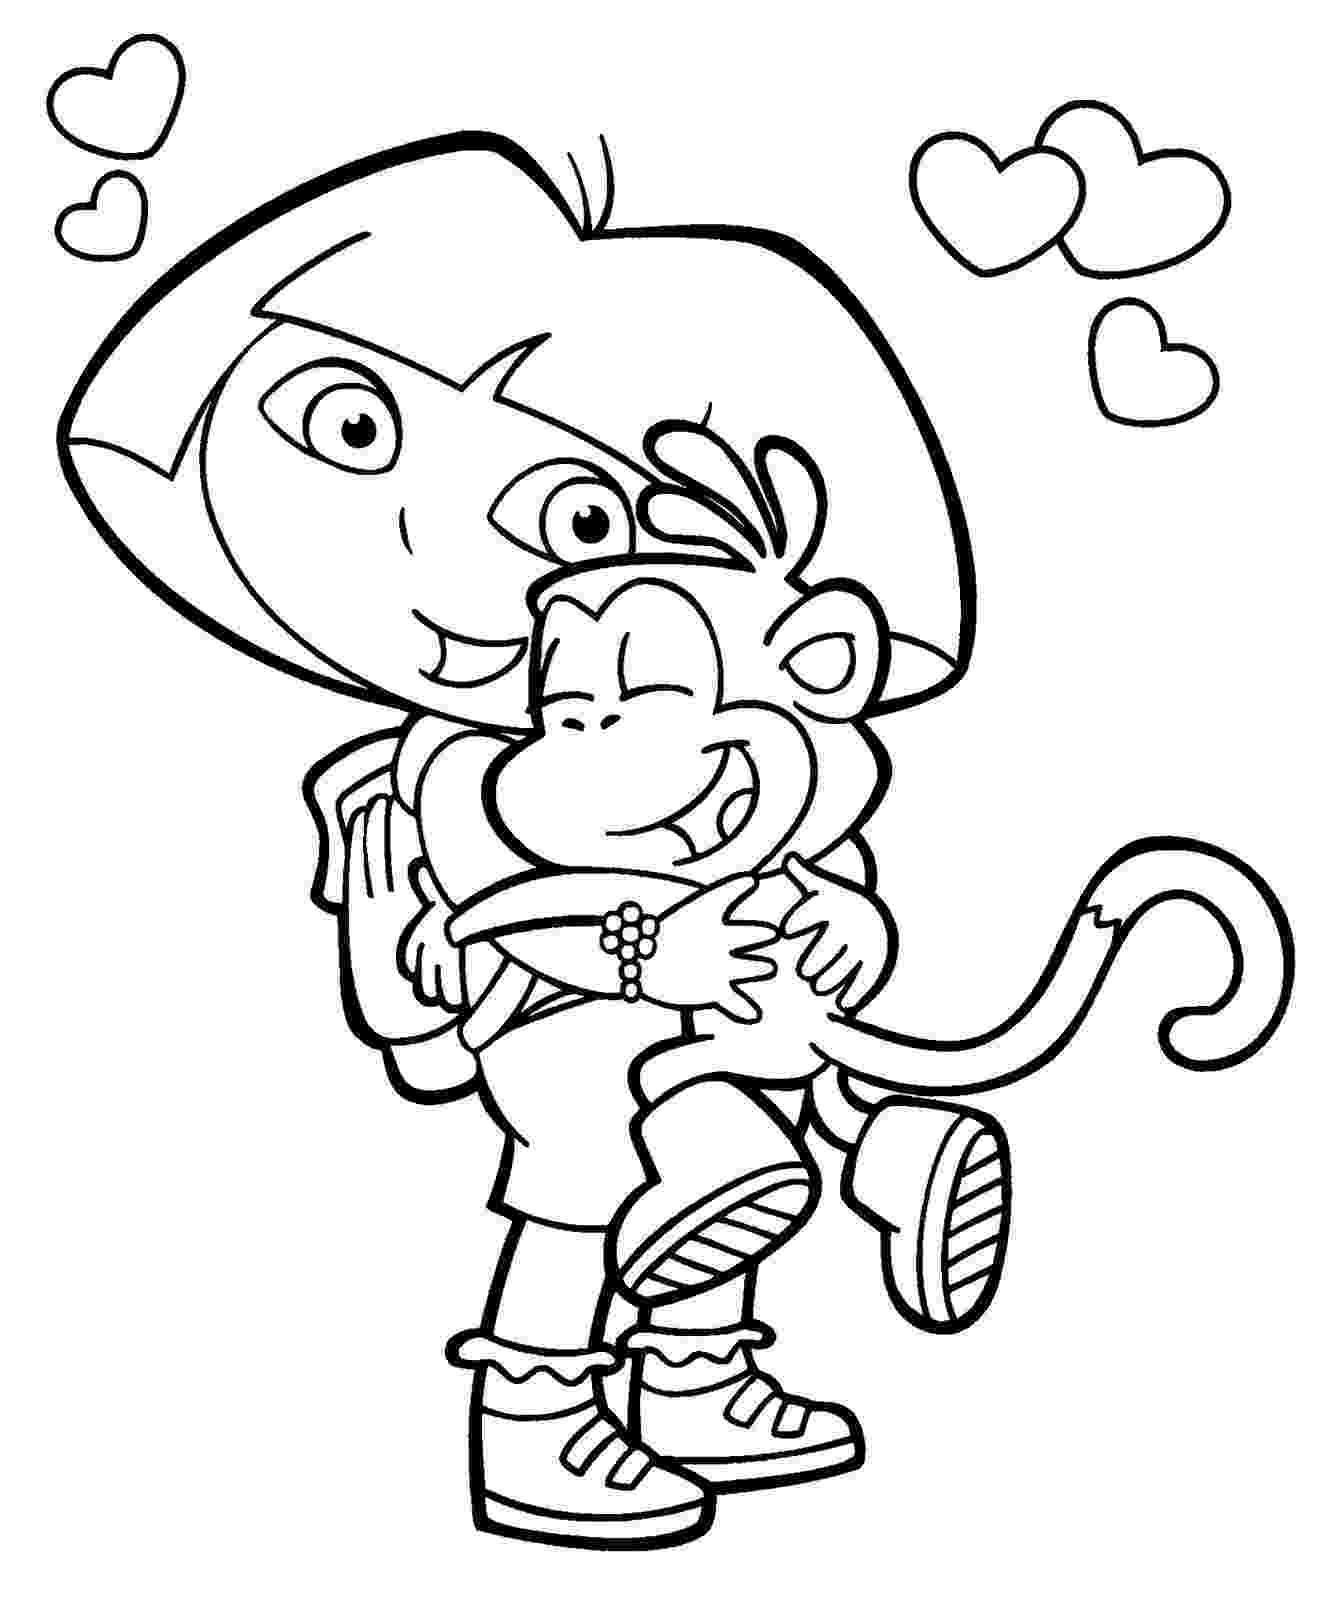 dora the explorer coloring pages free free printable dora the explorer coloring pages for kids explorer dora coloring the free pages 